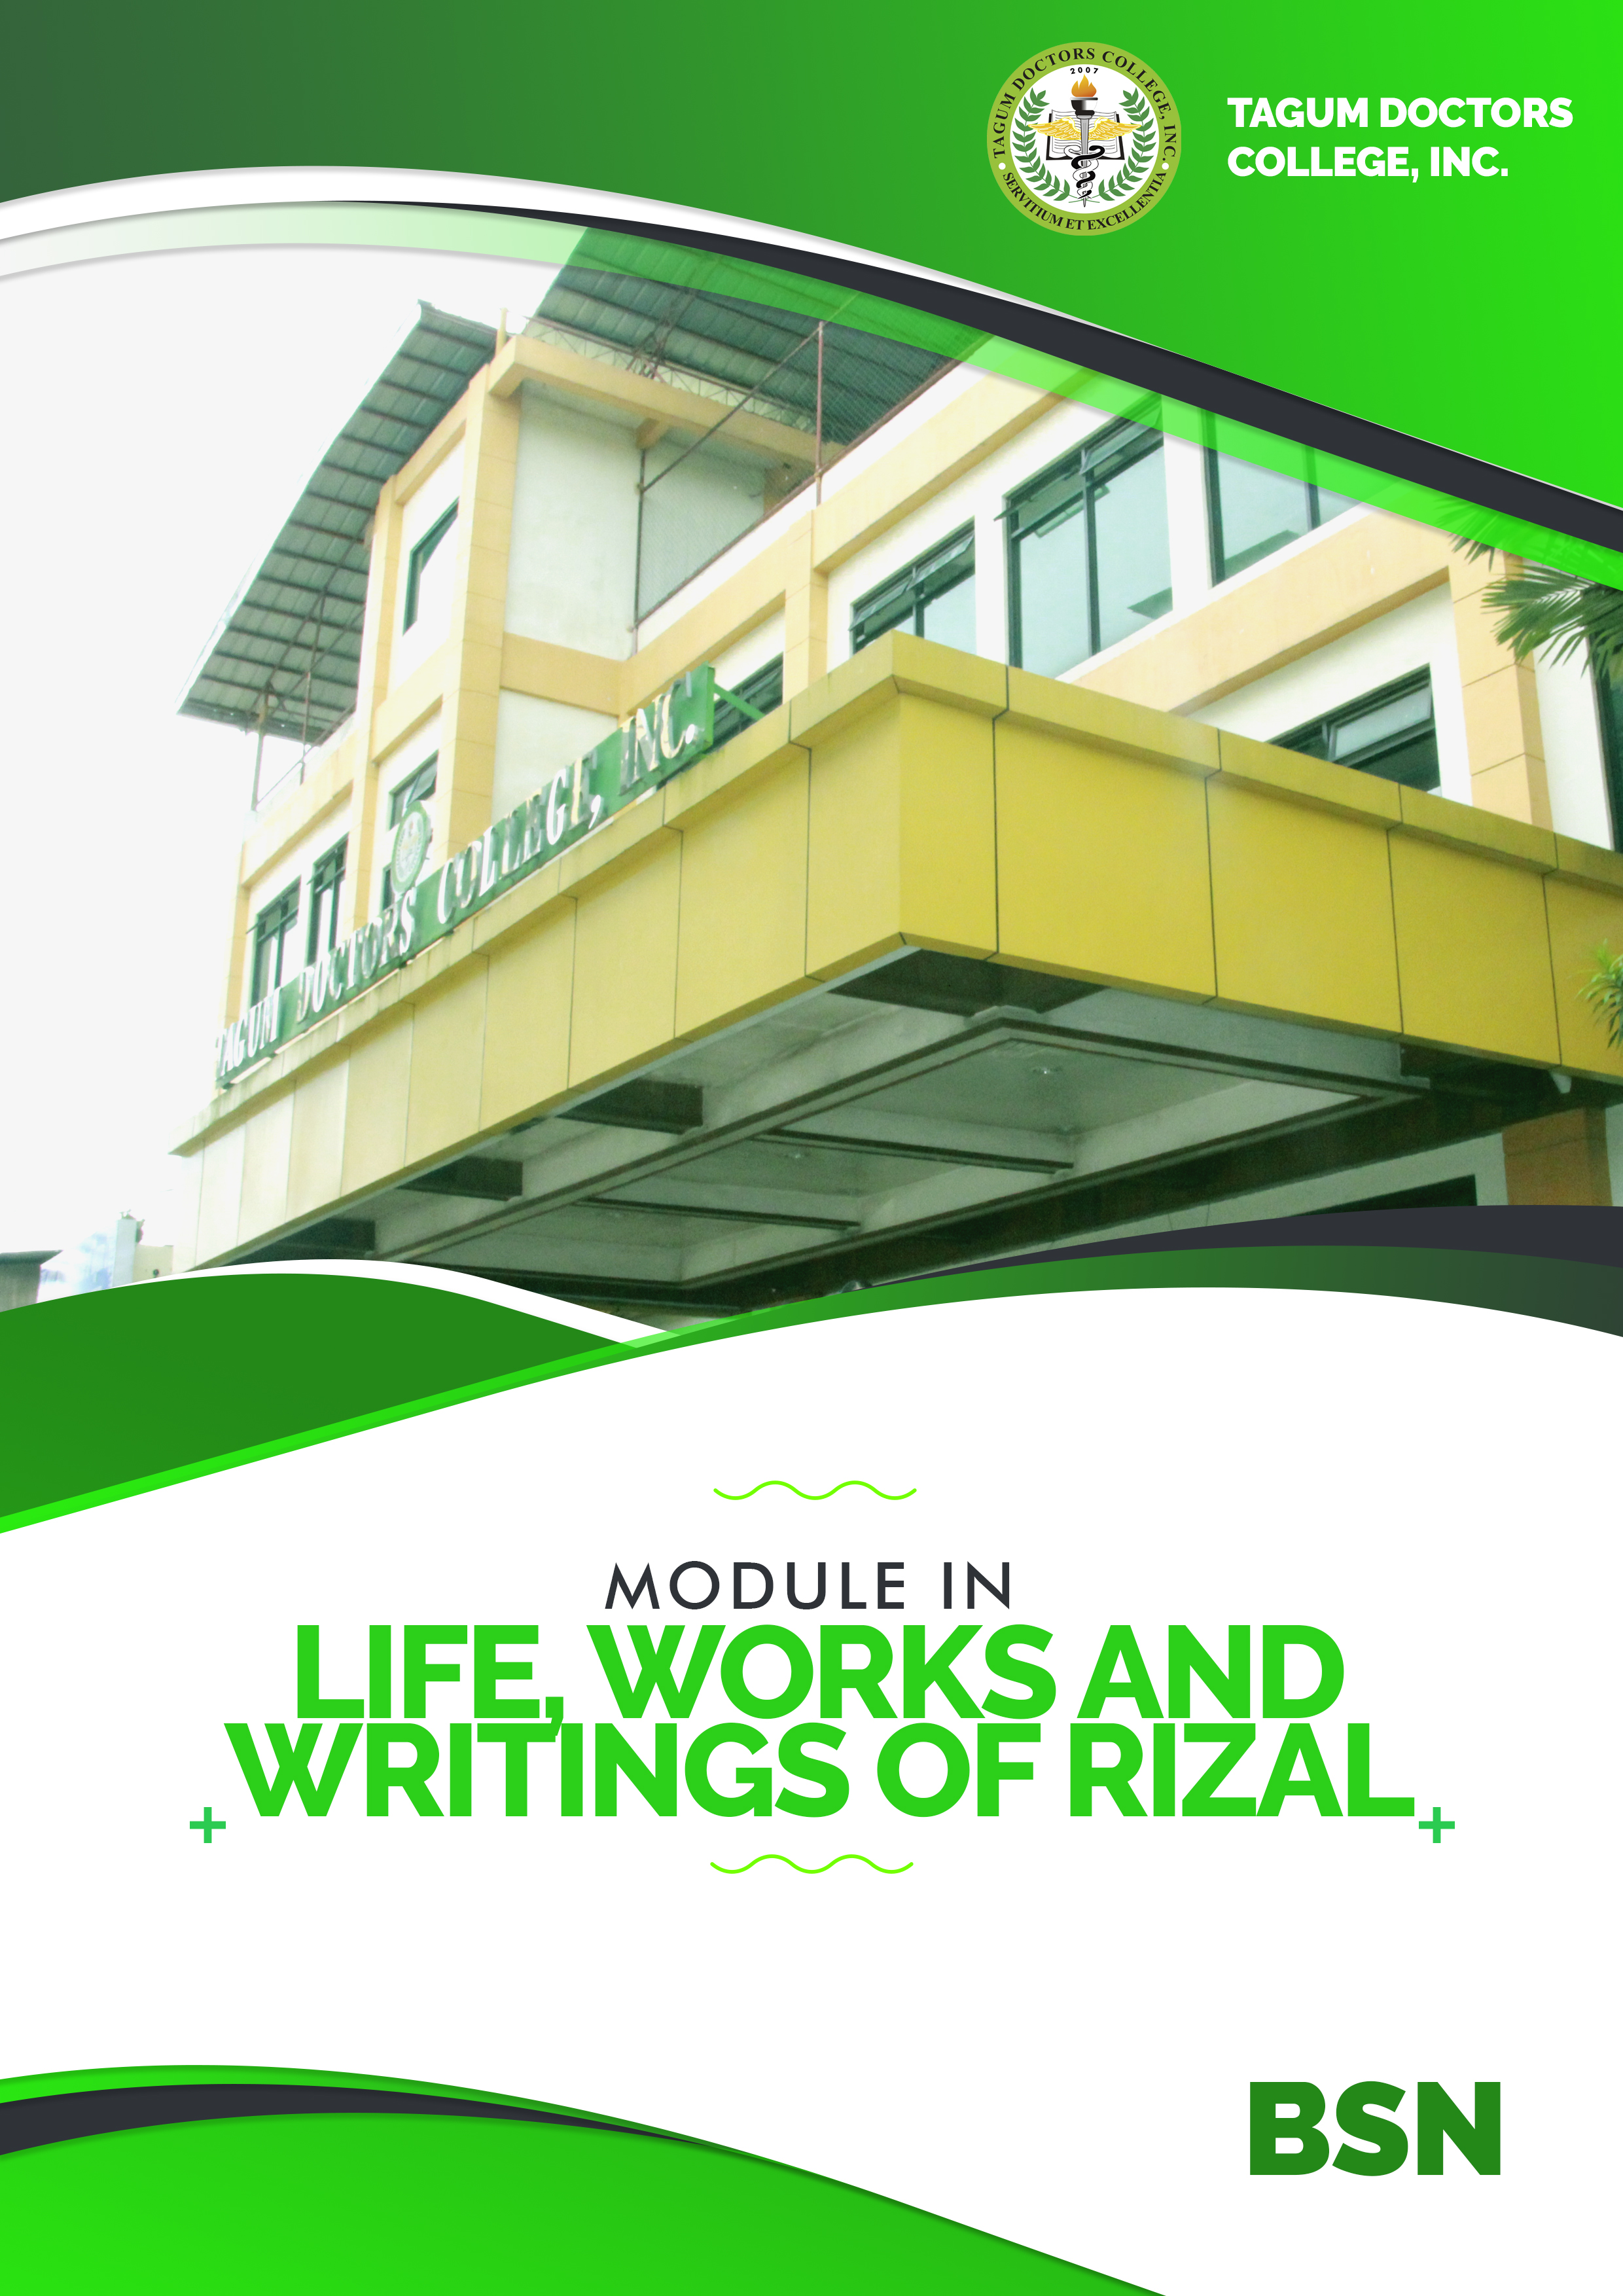 Life, Works and Writings of Rizal - BSN 4A